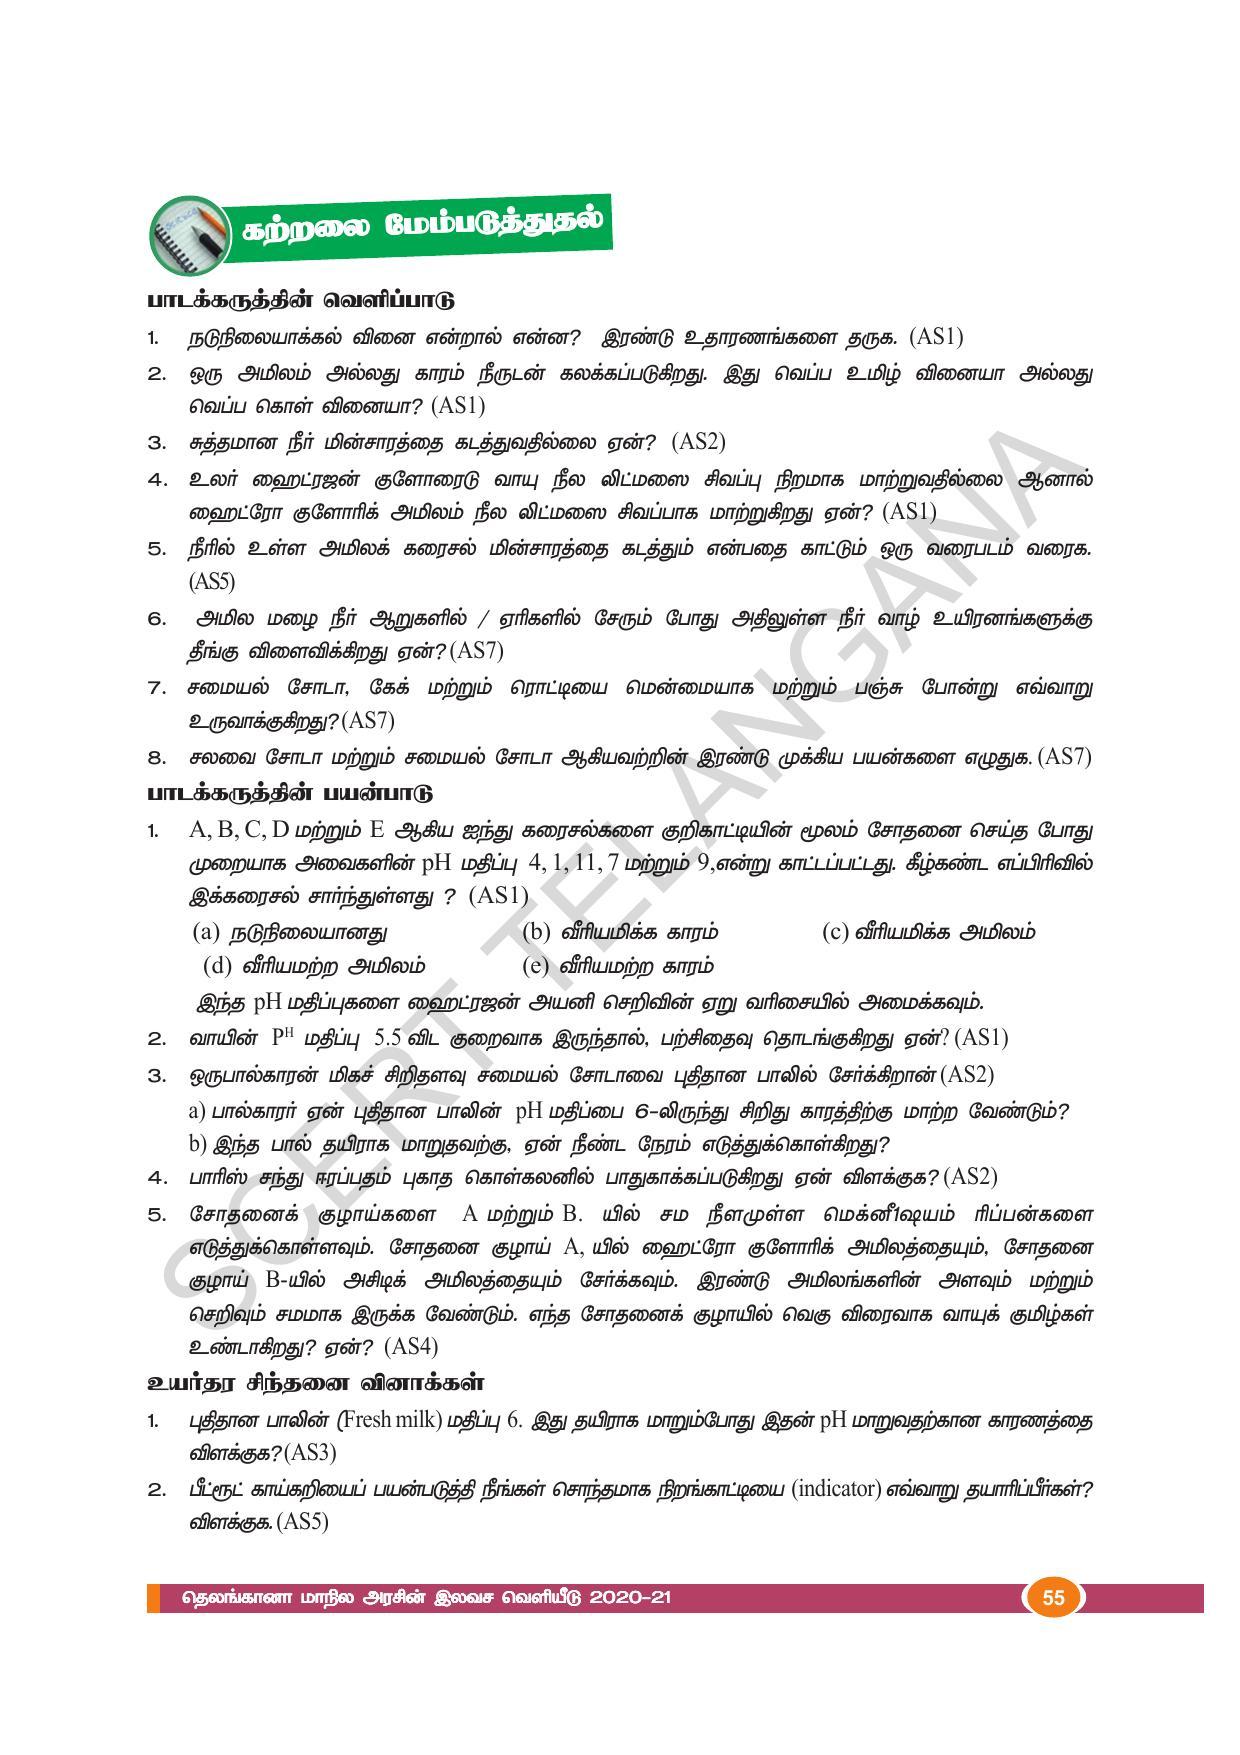 TS SCERT Class 10 Physical Science(Tamil Medium) Text Book - Page 67